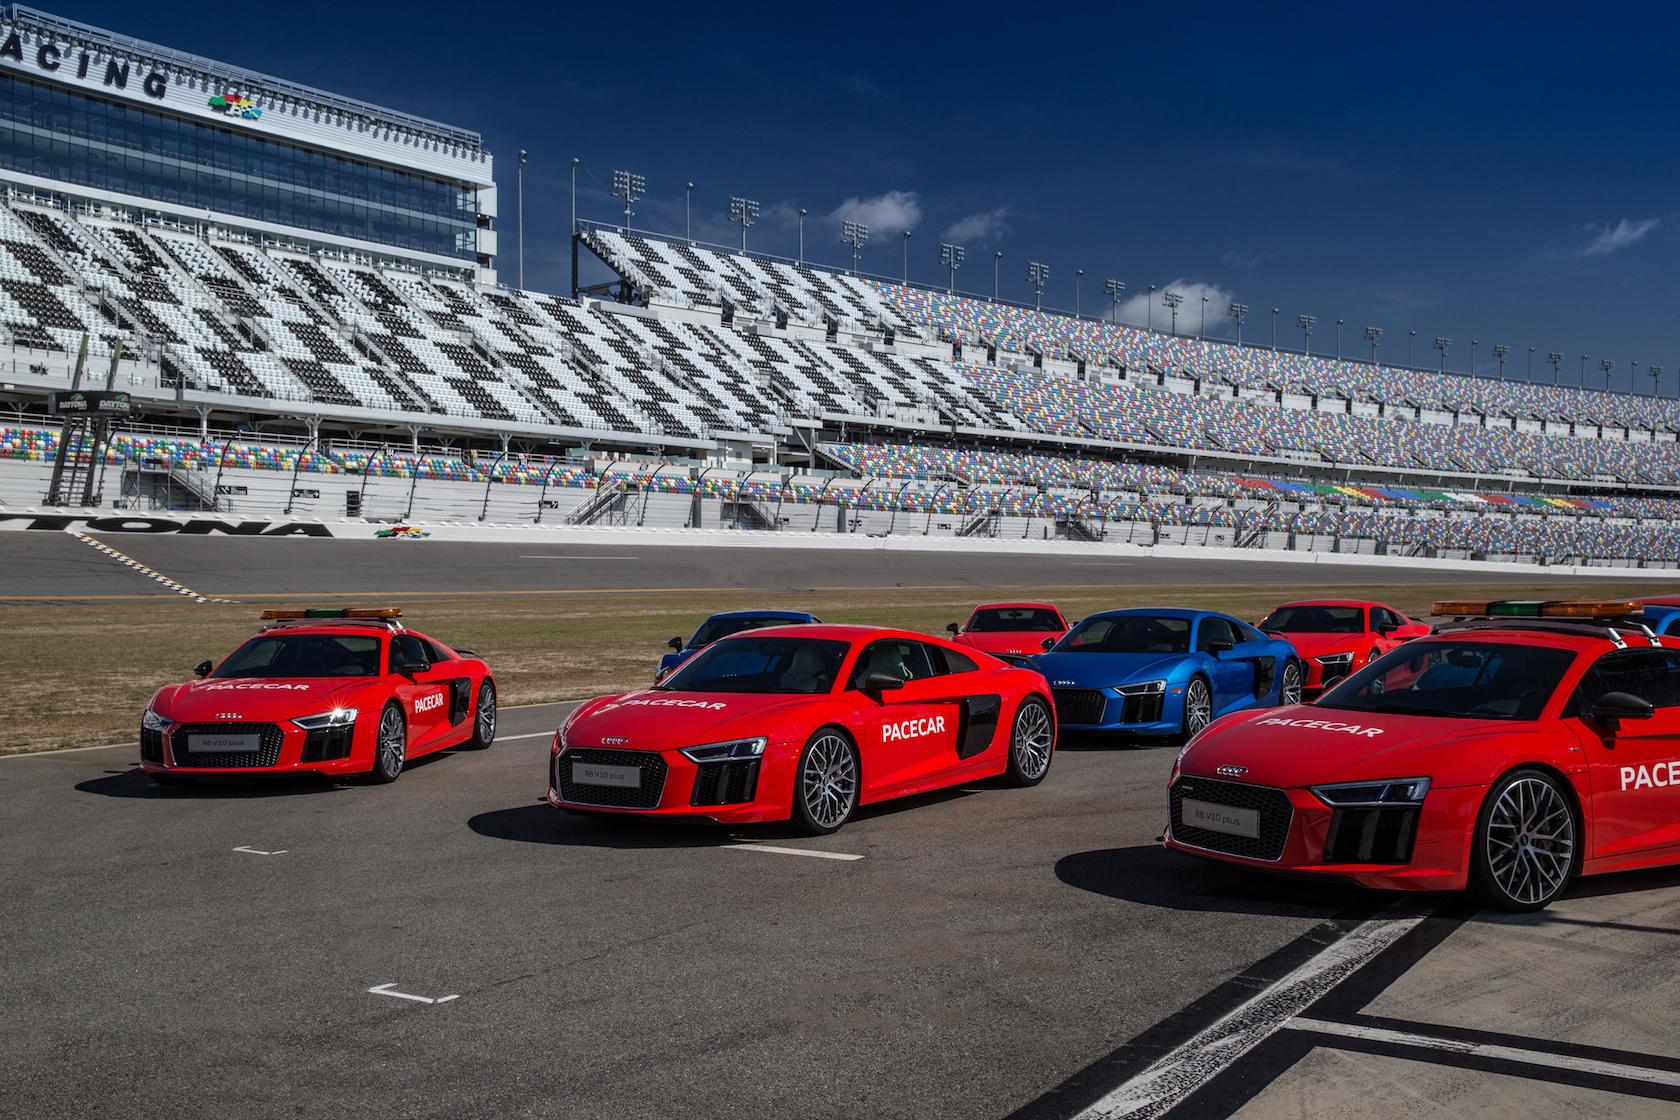 R8 V10 Plus and Pace Cars